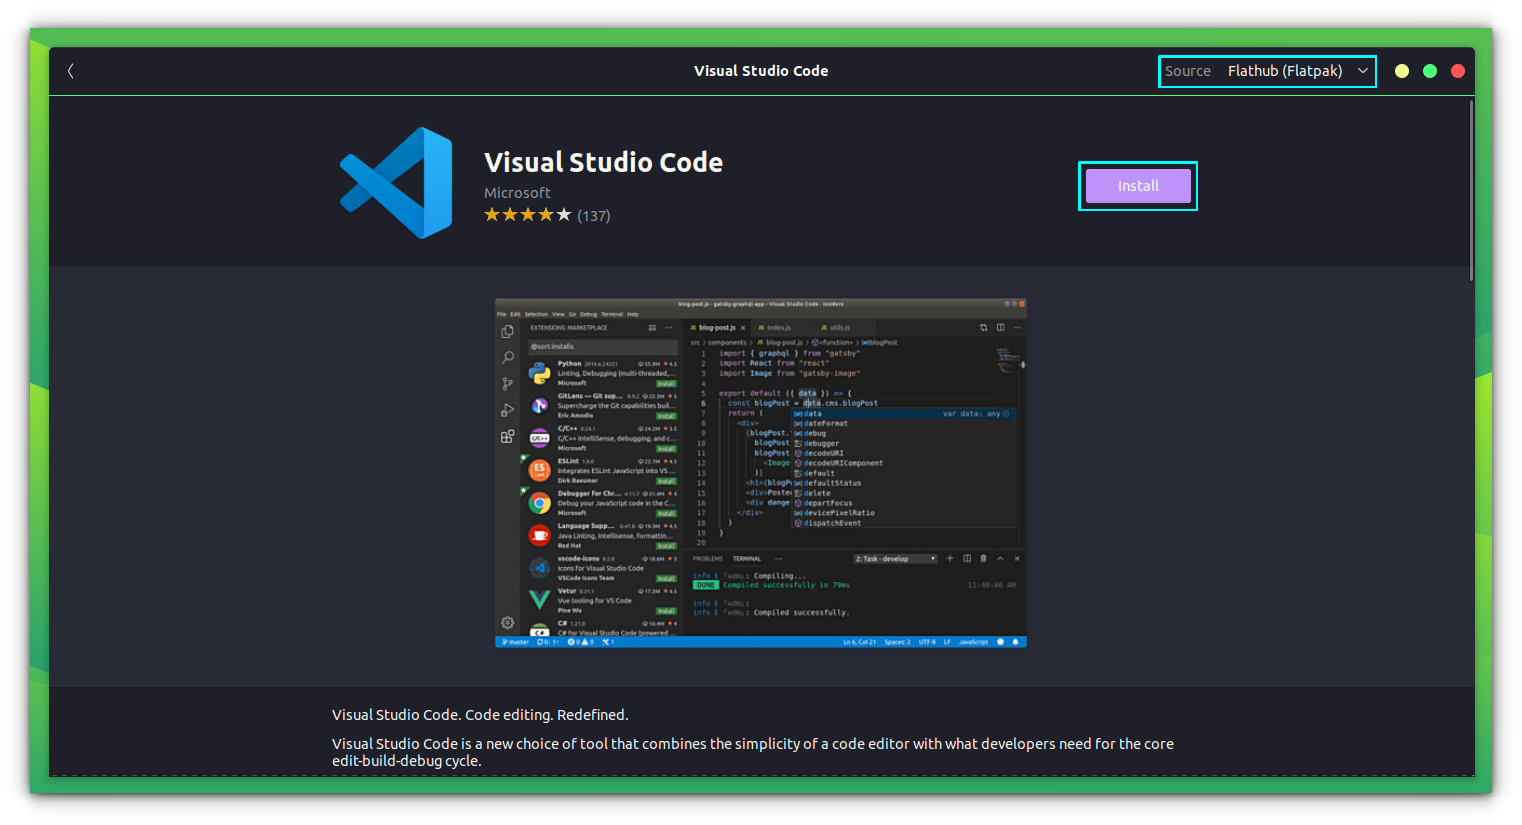 Install VS Code as a Flatpak application from supported Software Center